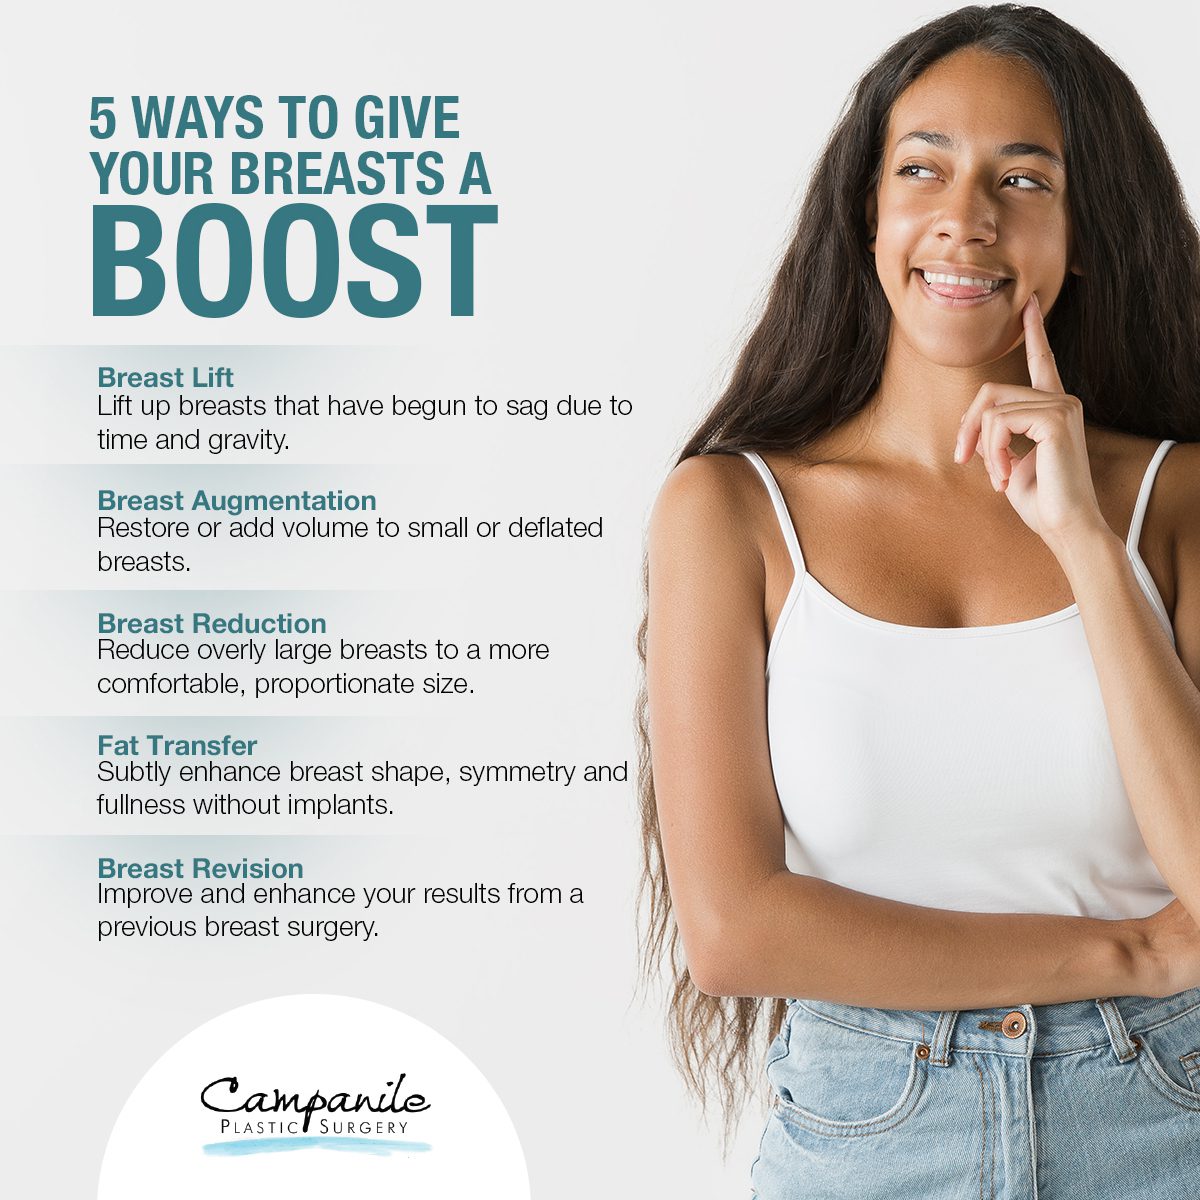 5 Ways to Give Your Breasts a Boost